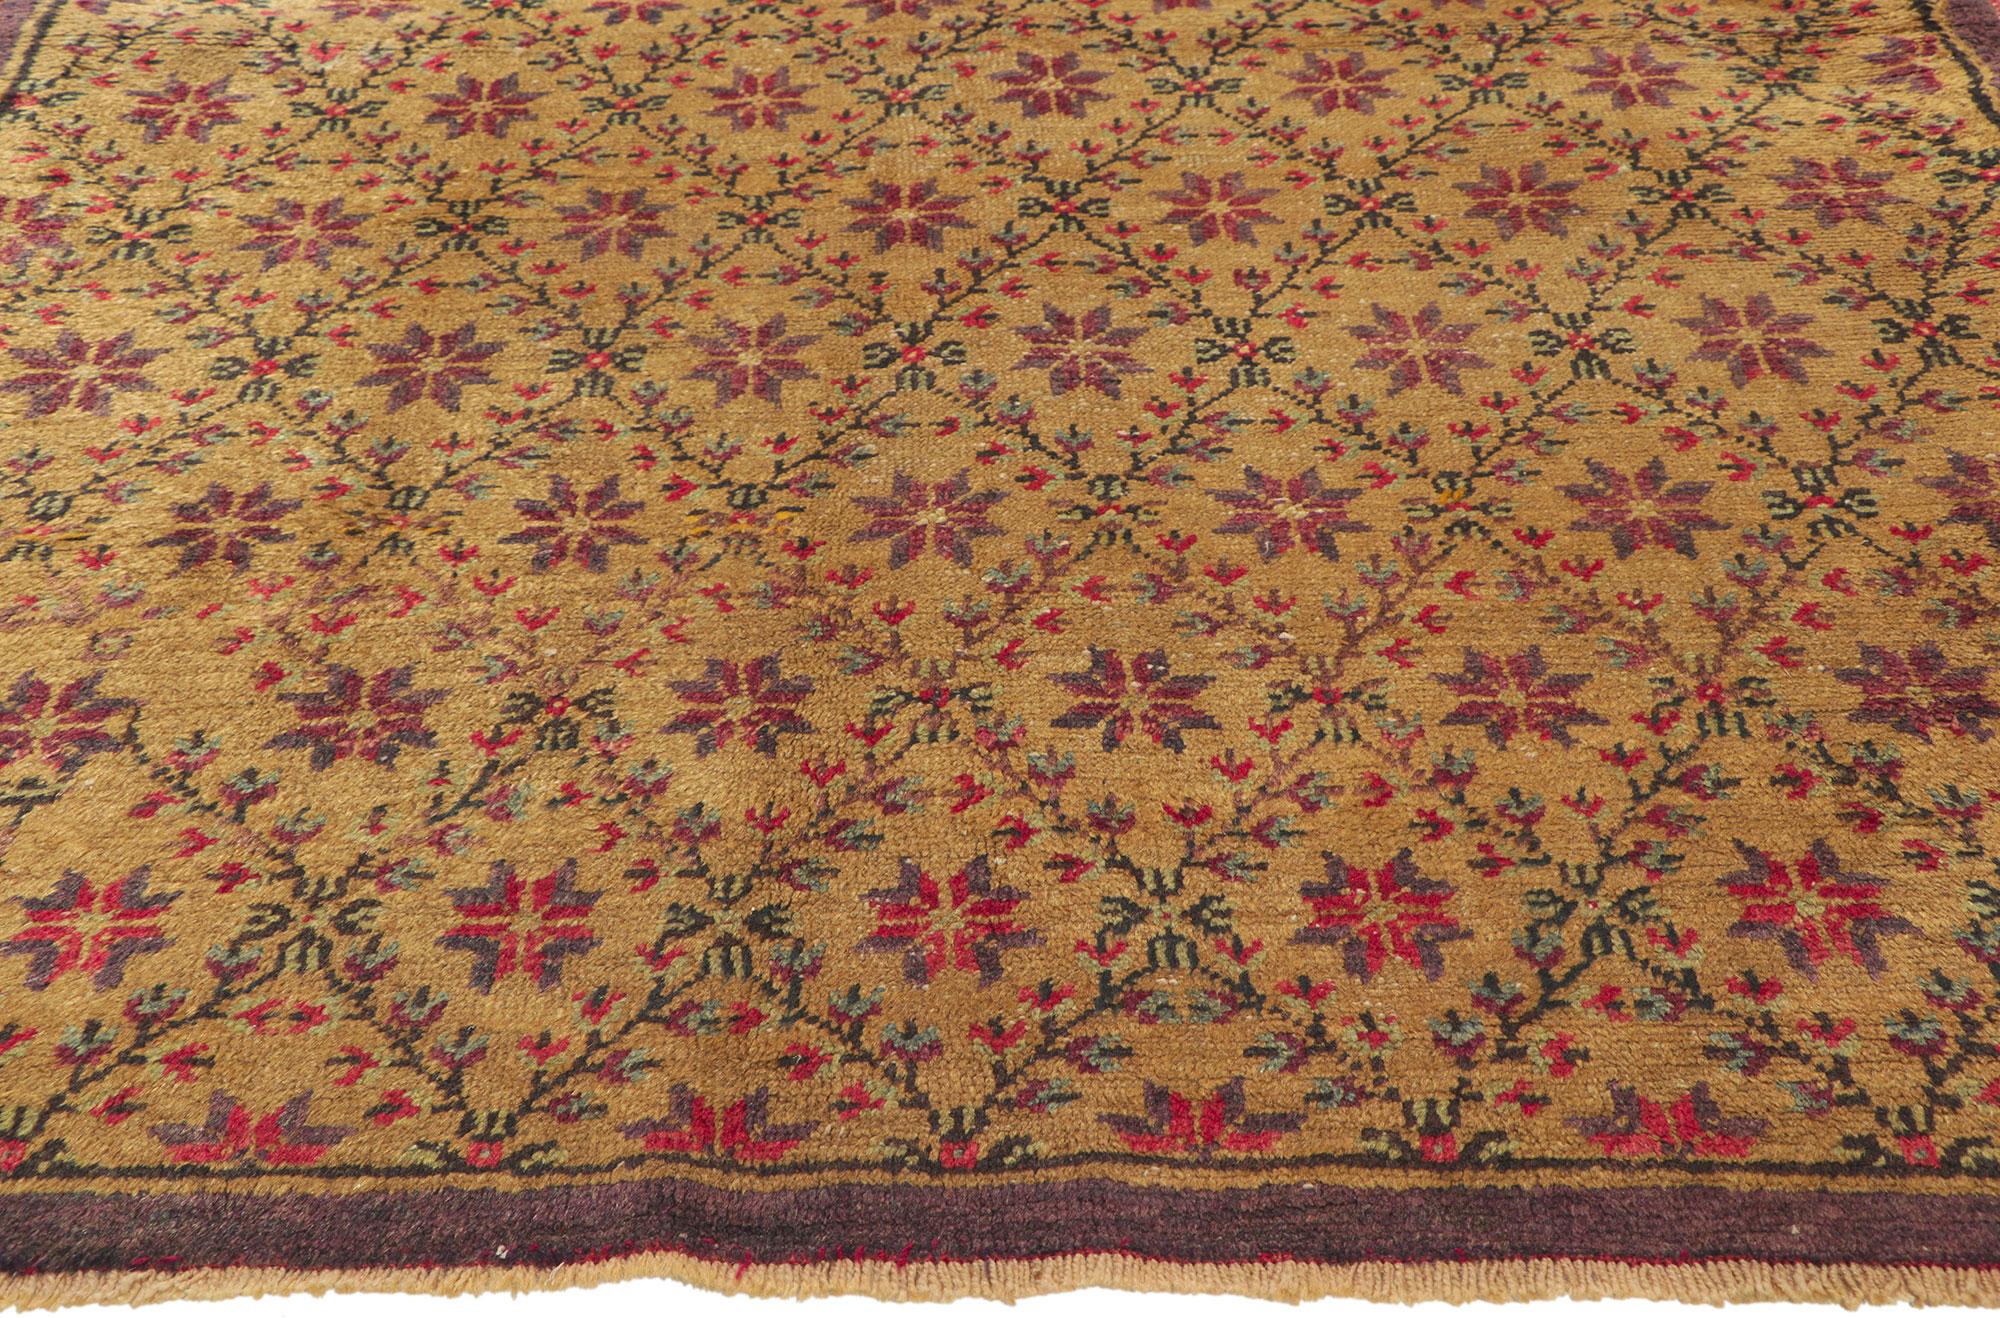 Rustic Vintage Turkish Oushak Rug with Floral Lattice Motif In Good Condition For Sale In Dallas, TX